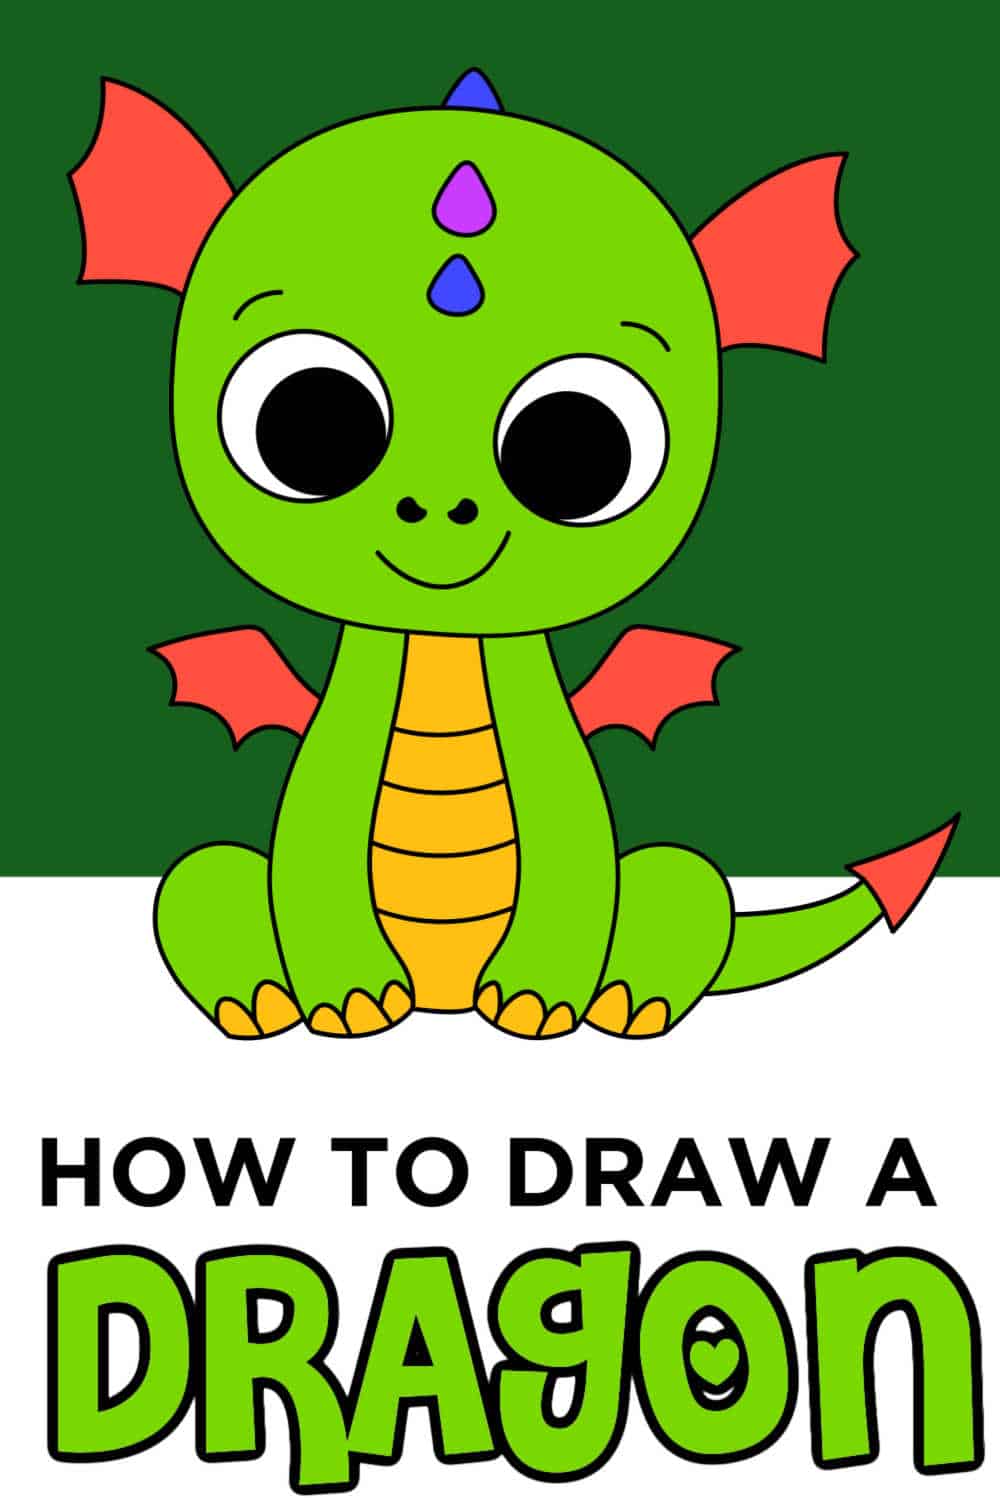 HOW TO DRAW A CARTOON DONUT : EASY DRAWING FOR KIDS - YouTube-saigonsouth.com.vn